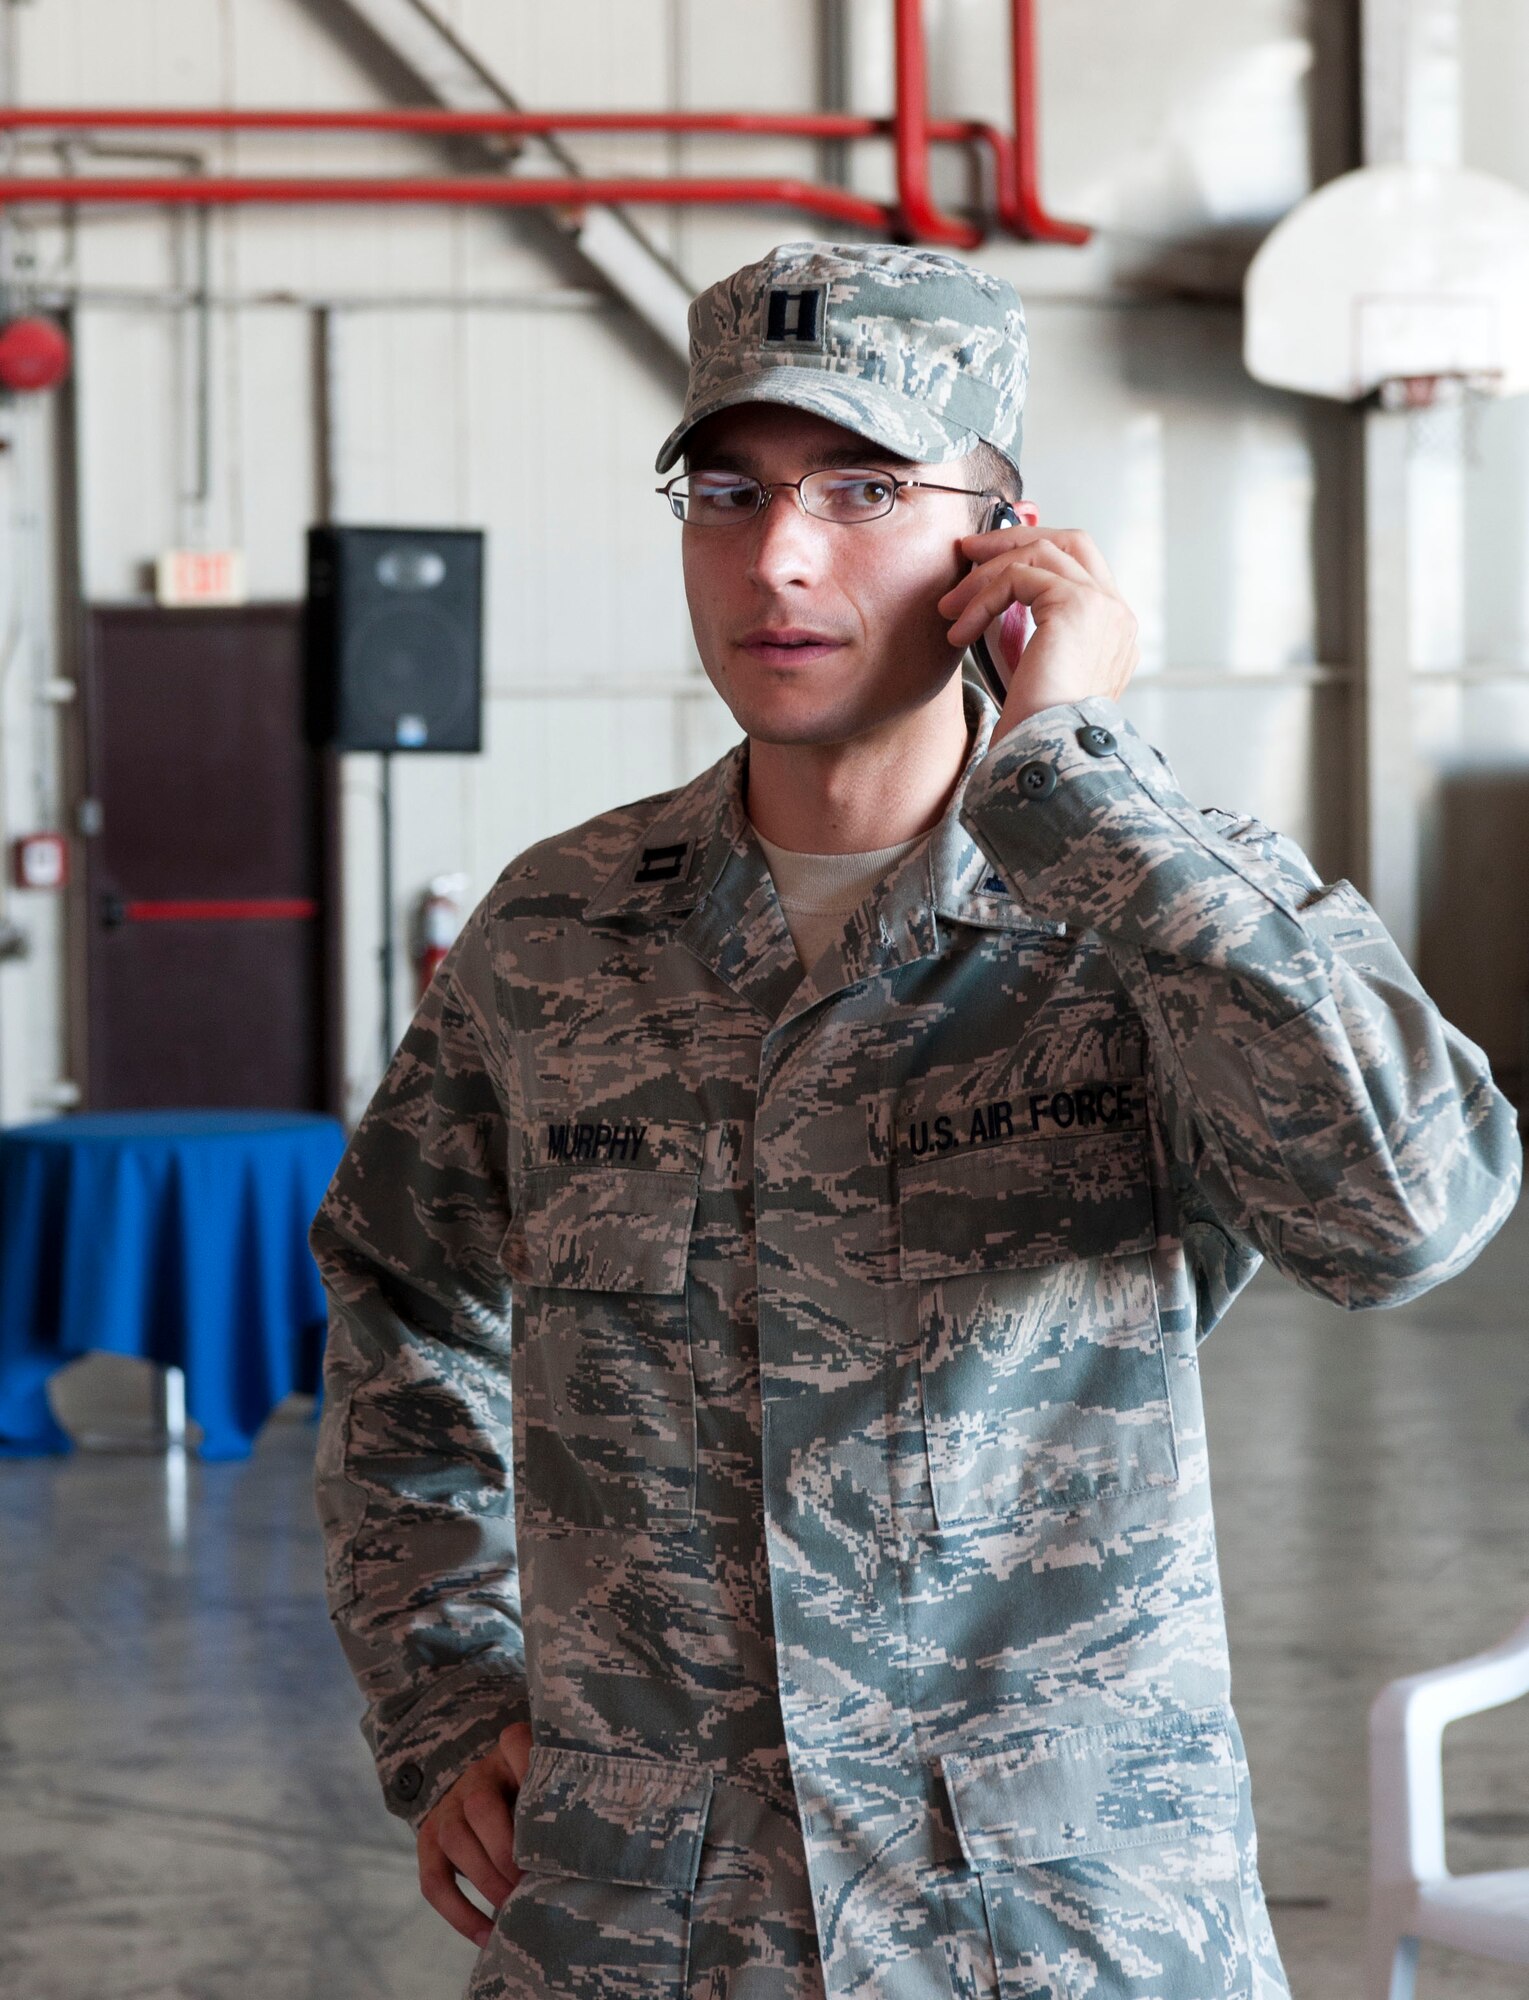 Capt. Jonathan Murphy, 39th Air Base Wing chief of protocol, answers a phone call while setting up a practice for an assumption-of-command ceremony Aug. 24, 2011 at Incirlik Air Base, Turkey. (U.S. Air Force photo by Airman 1st Class Clayton Lenhardt/Released)